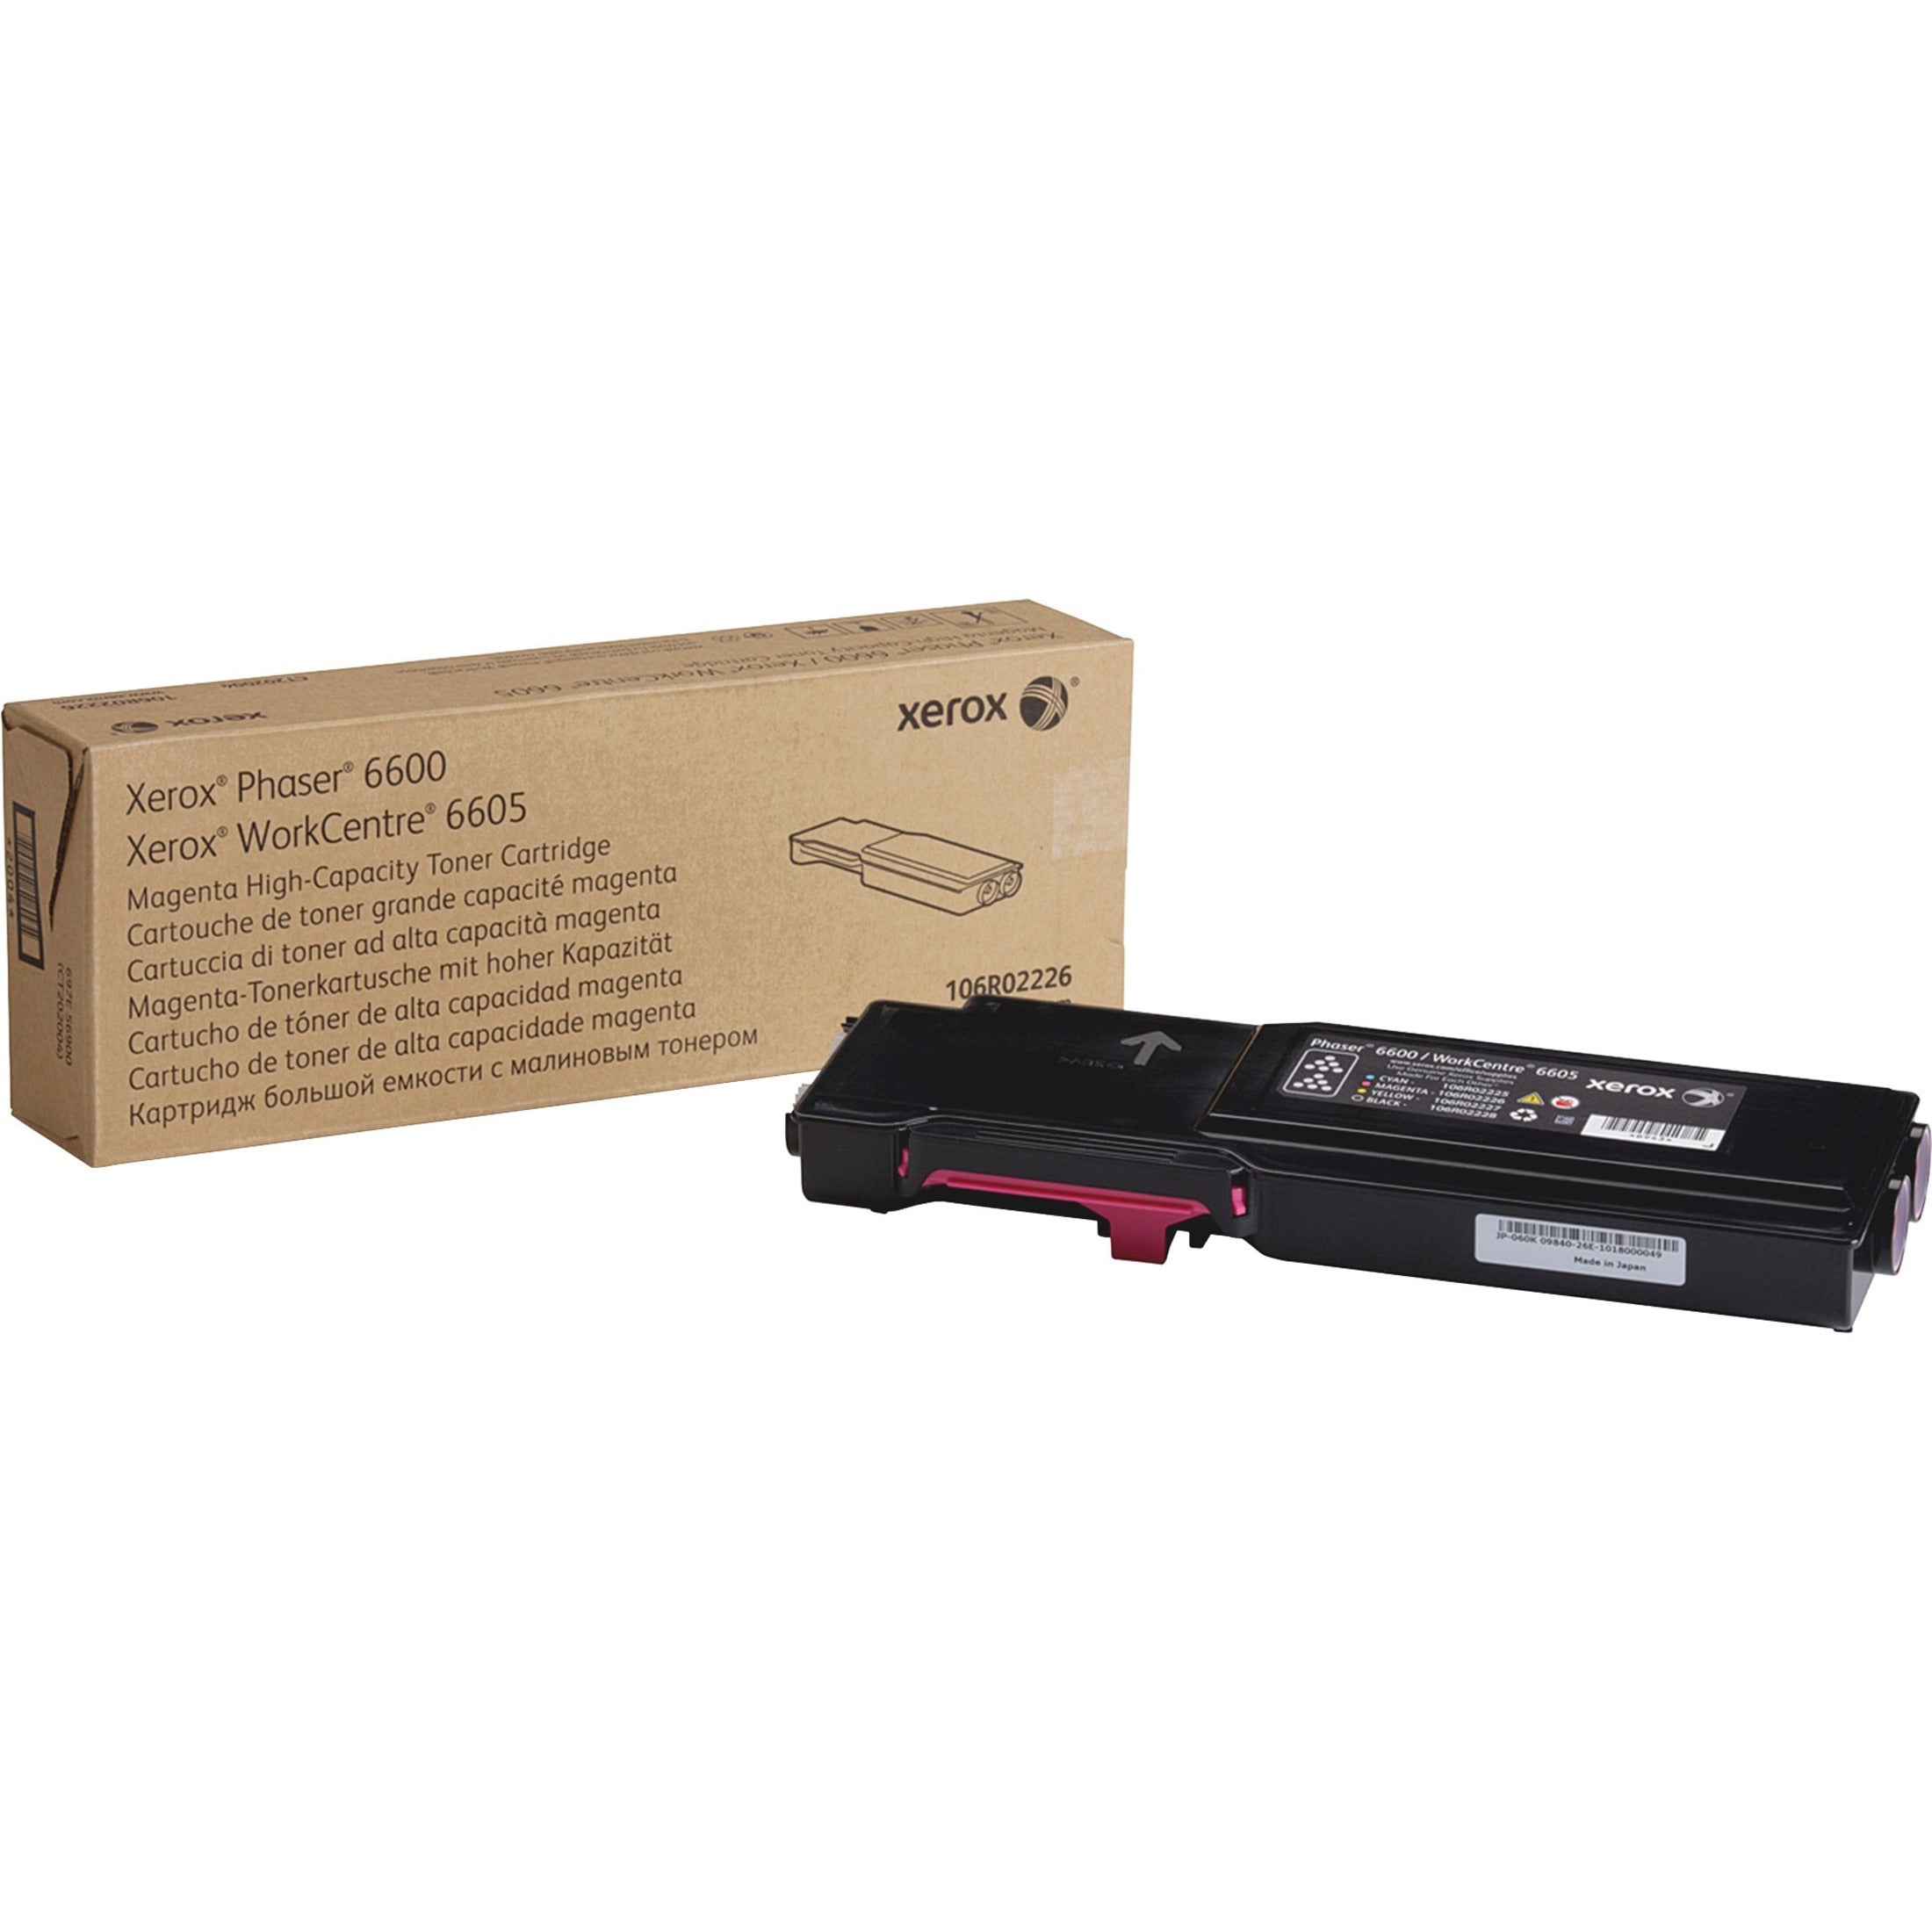 Xerox 106R02226 Phaser 6600/WorkCentre 6605 High Capacity Toner Cartridge, Magenta, 6,000 Pages Yield